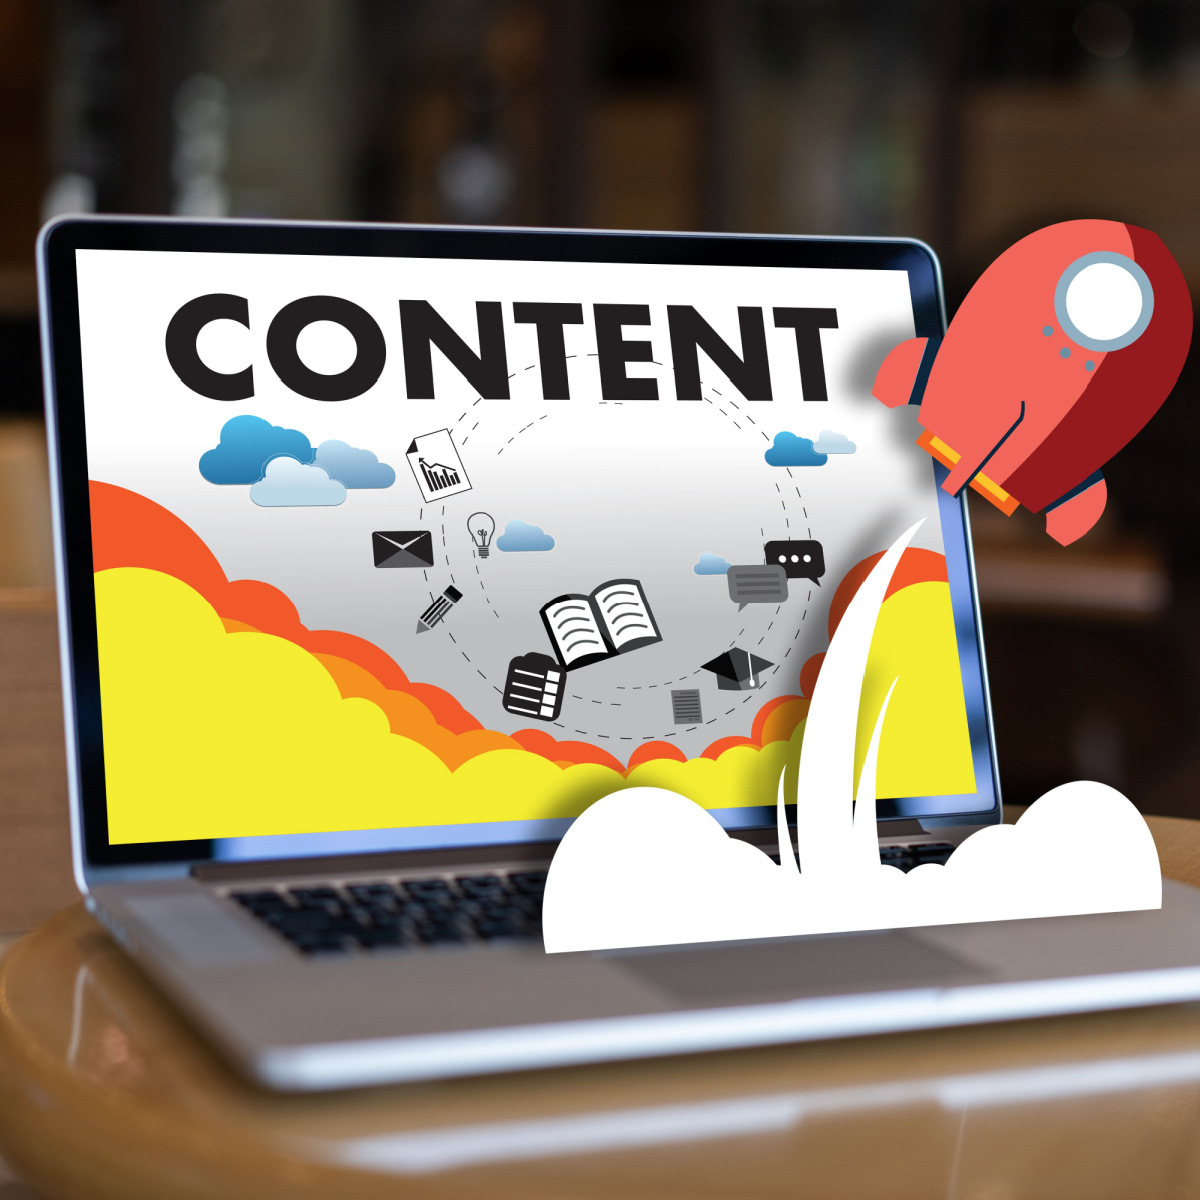 Relevant content boosts your Houston marketing strategy.